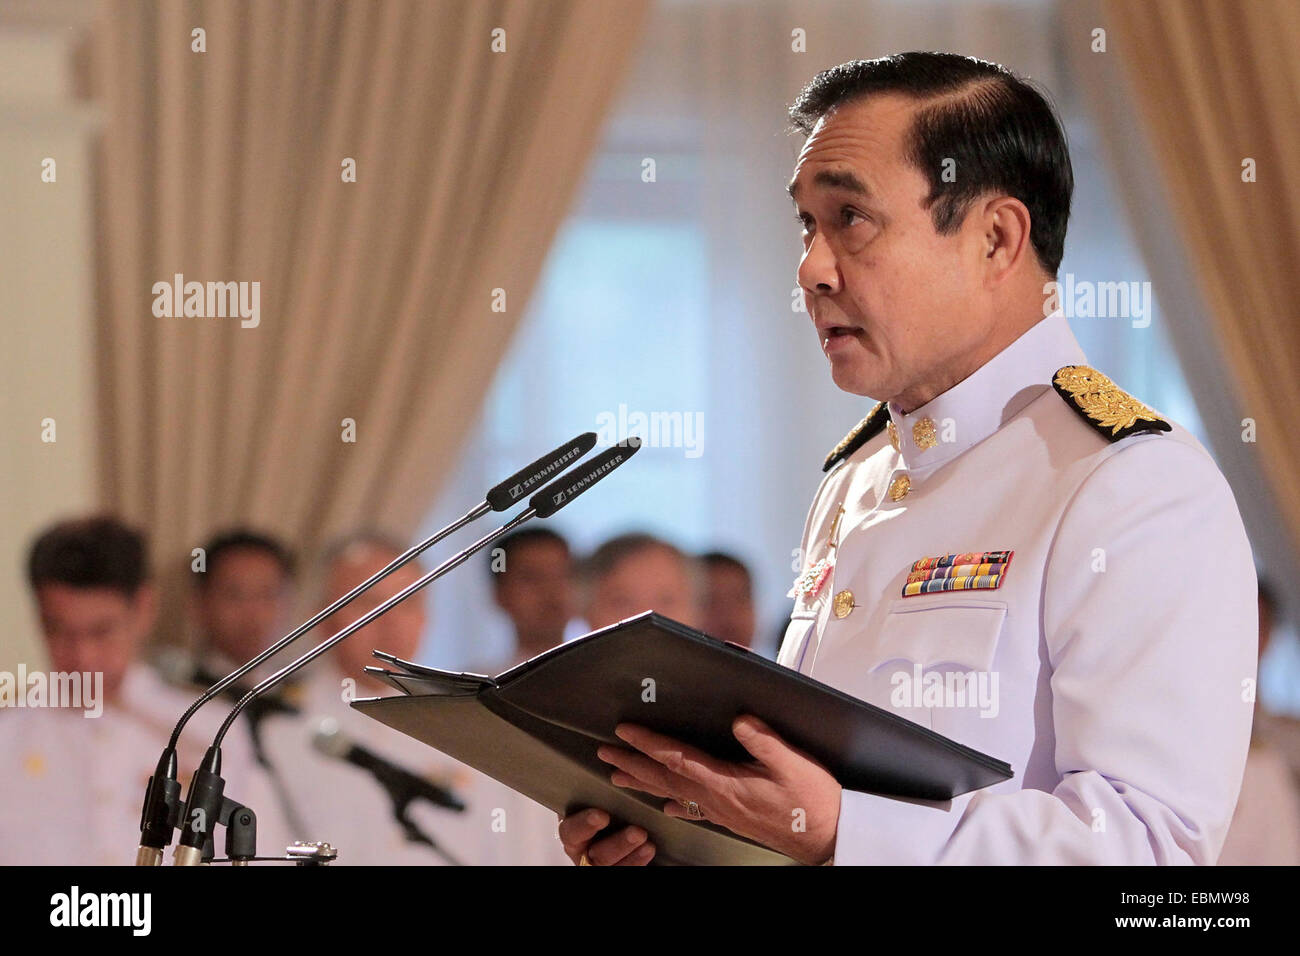 Bangkok, Thailand. 3rd Dec, 2014. Thai Prime Minister Gen. Prayuth Chan-ocha speaks at the oath swearing ceremony of allegiance to be good government officials as part of the King Bhumibol Adulyadej's upcoming 87th birthday celebration at Government House in Bangkok, Thailand, Dec. 3, 2014. Thai King Bhumibol Adulyadej would celebrate his 87th birthday on Dec. 5. Credit:  Rachen Sageamsak/Xinhua/Alamy Live News Stock Photo